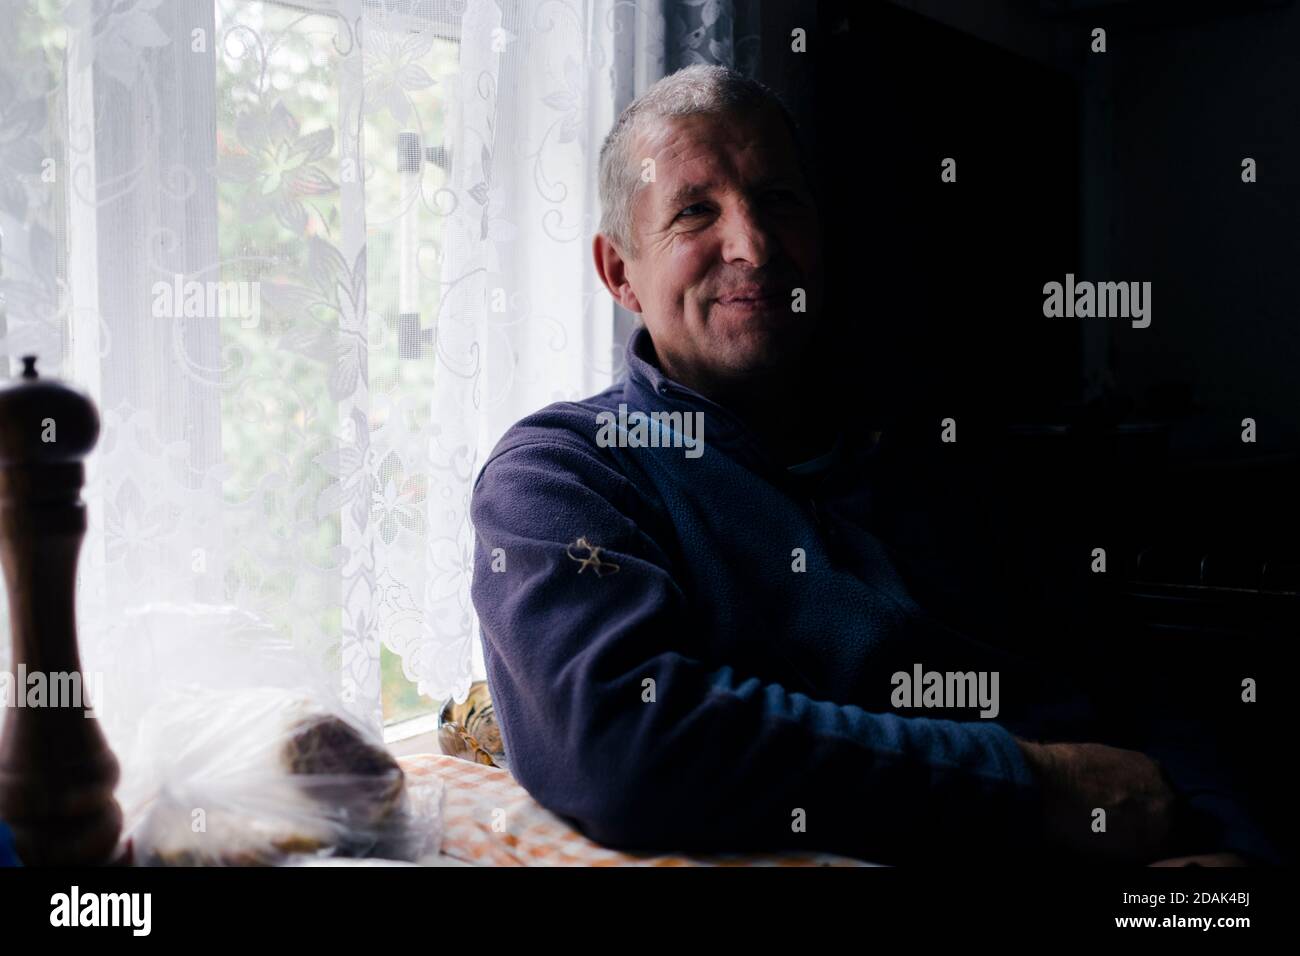 A man sitting by the window; shadow falls on half of his body and face. Stock Photo